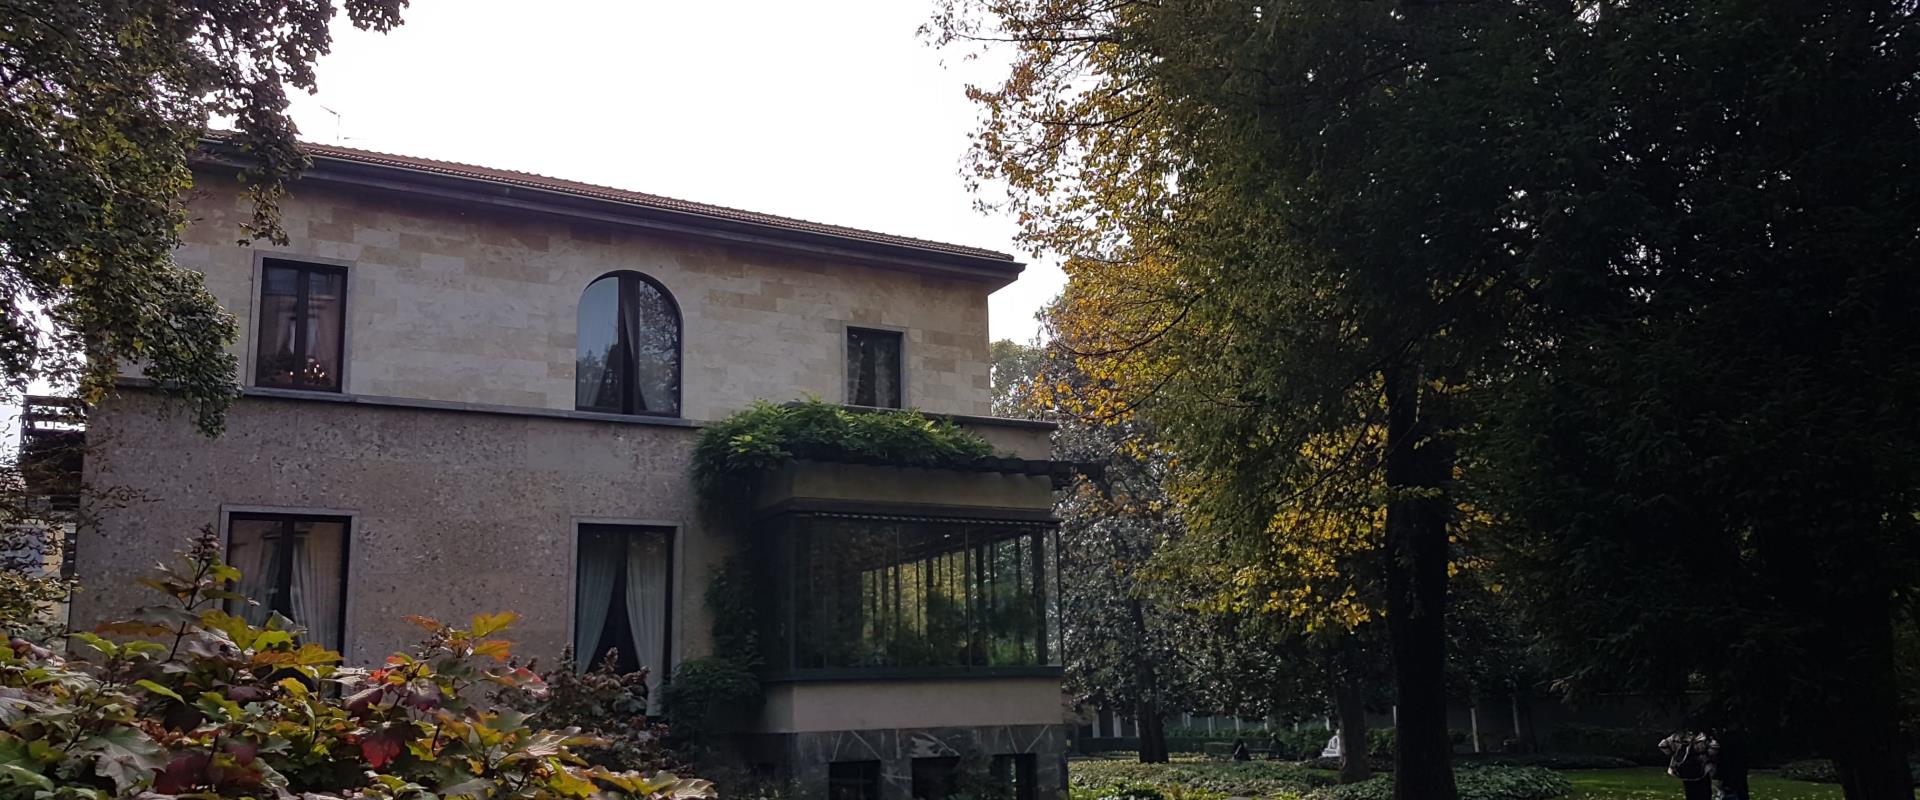 Stay at the Best Western Hotel City in Milan and discover the best attractions in the city. A few minutes walk from the Hotel you can visit Villa Necchi Campiglio, a splendid historic residence, surrounded by a lush garden.